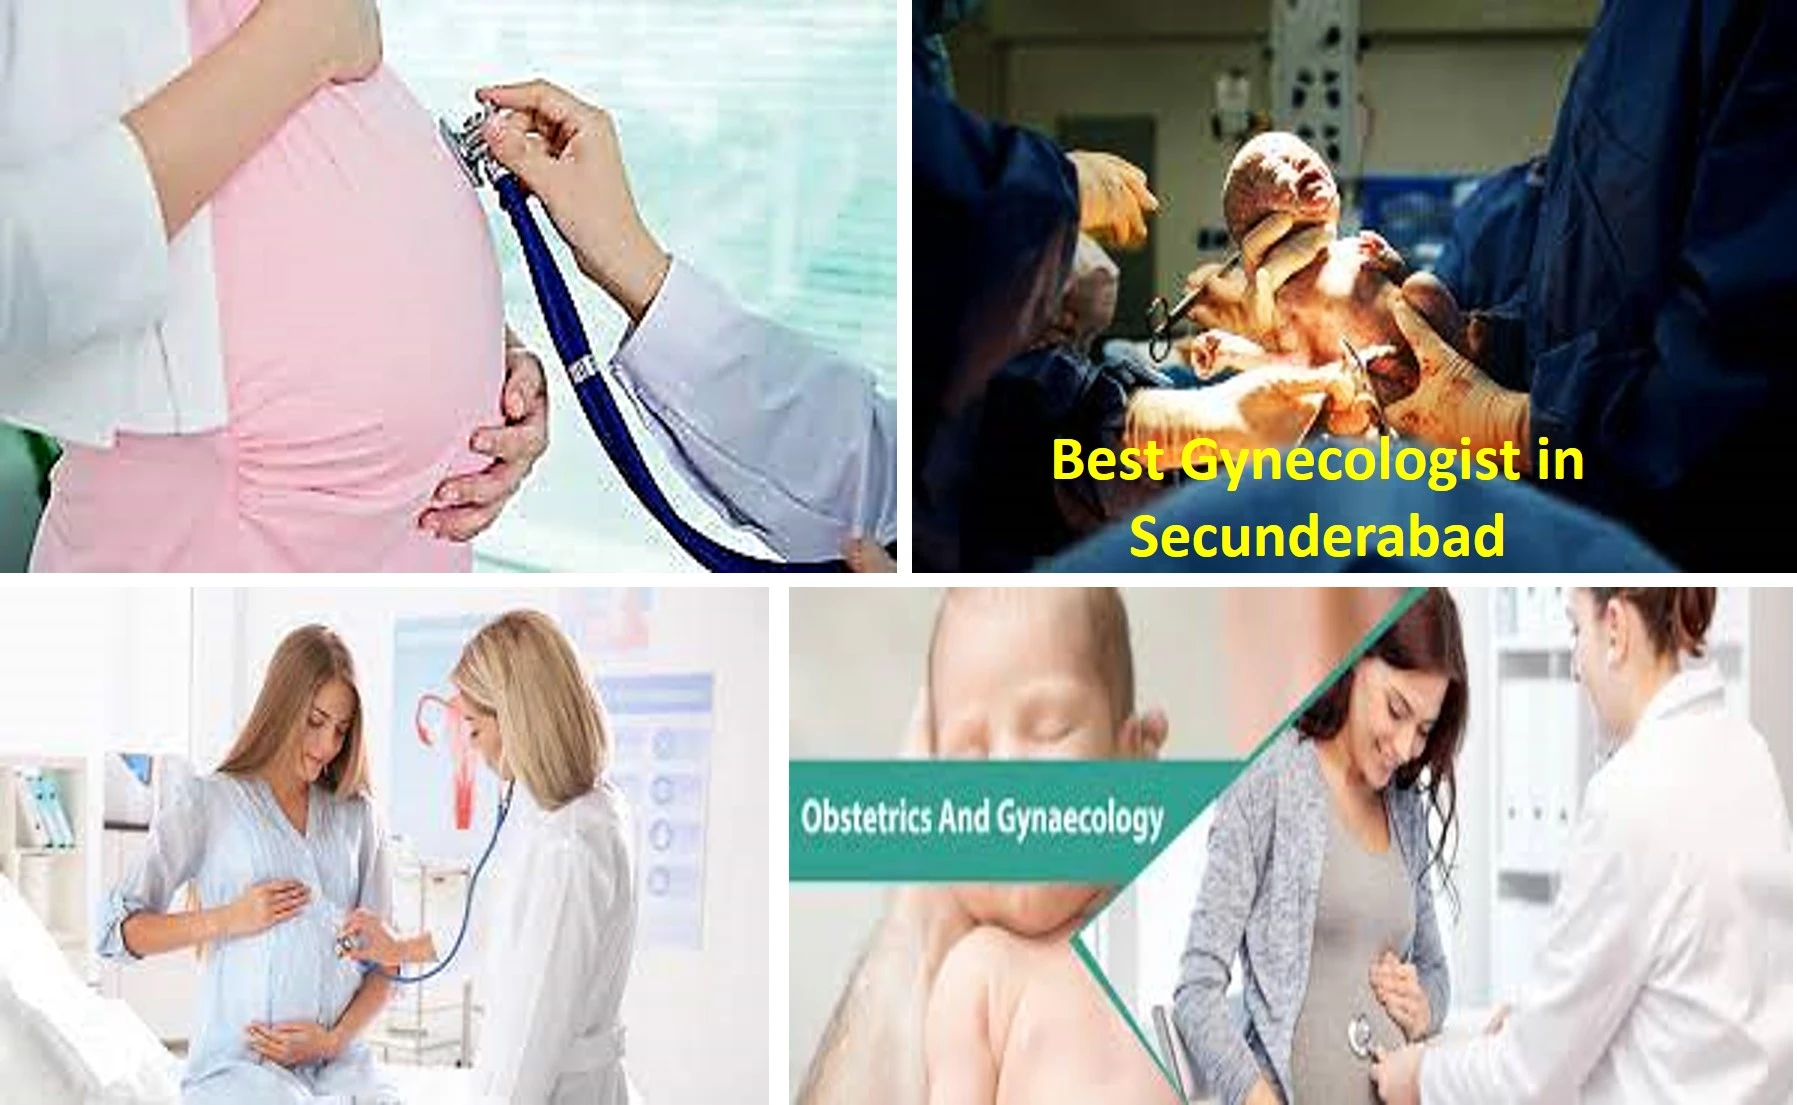  famous Gynecologist and Obstetrics in Secunderabad